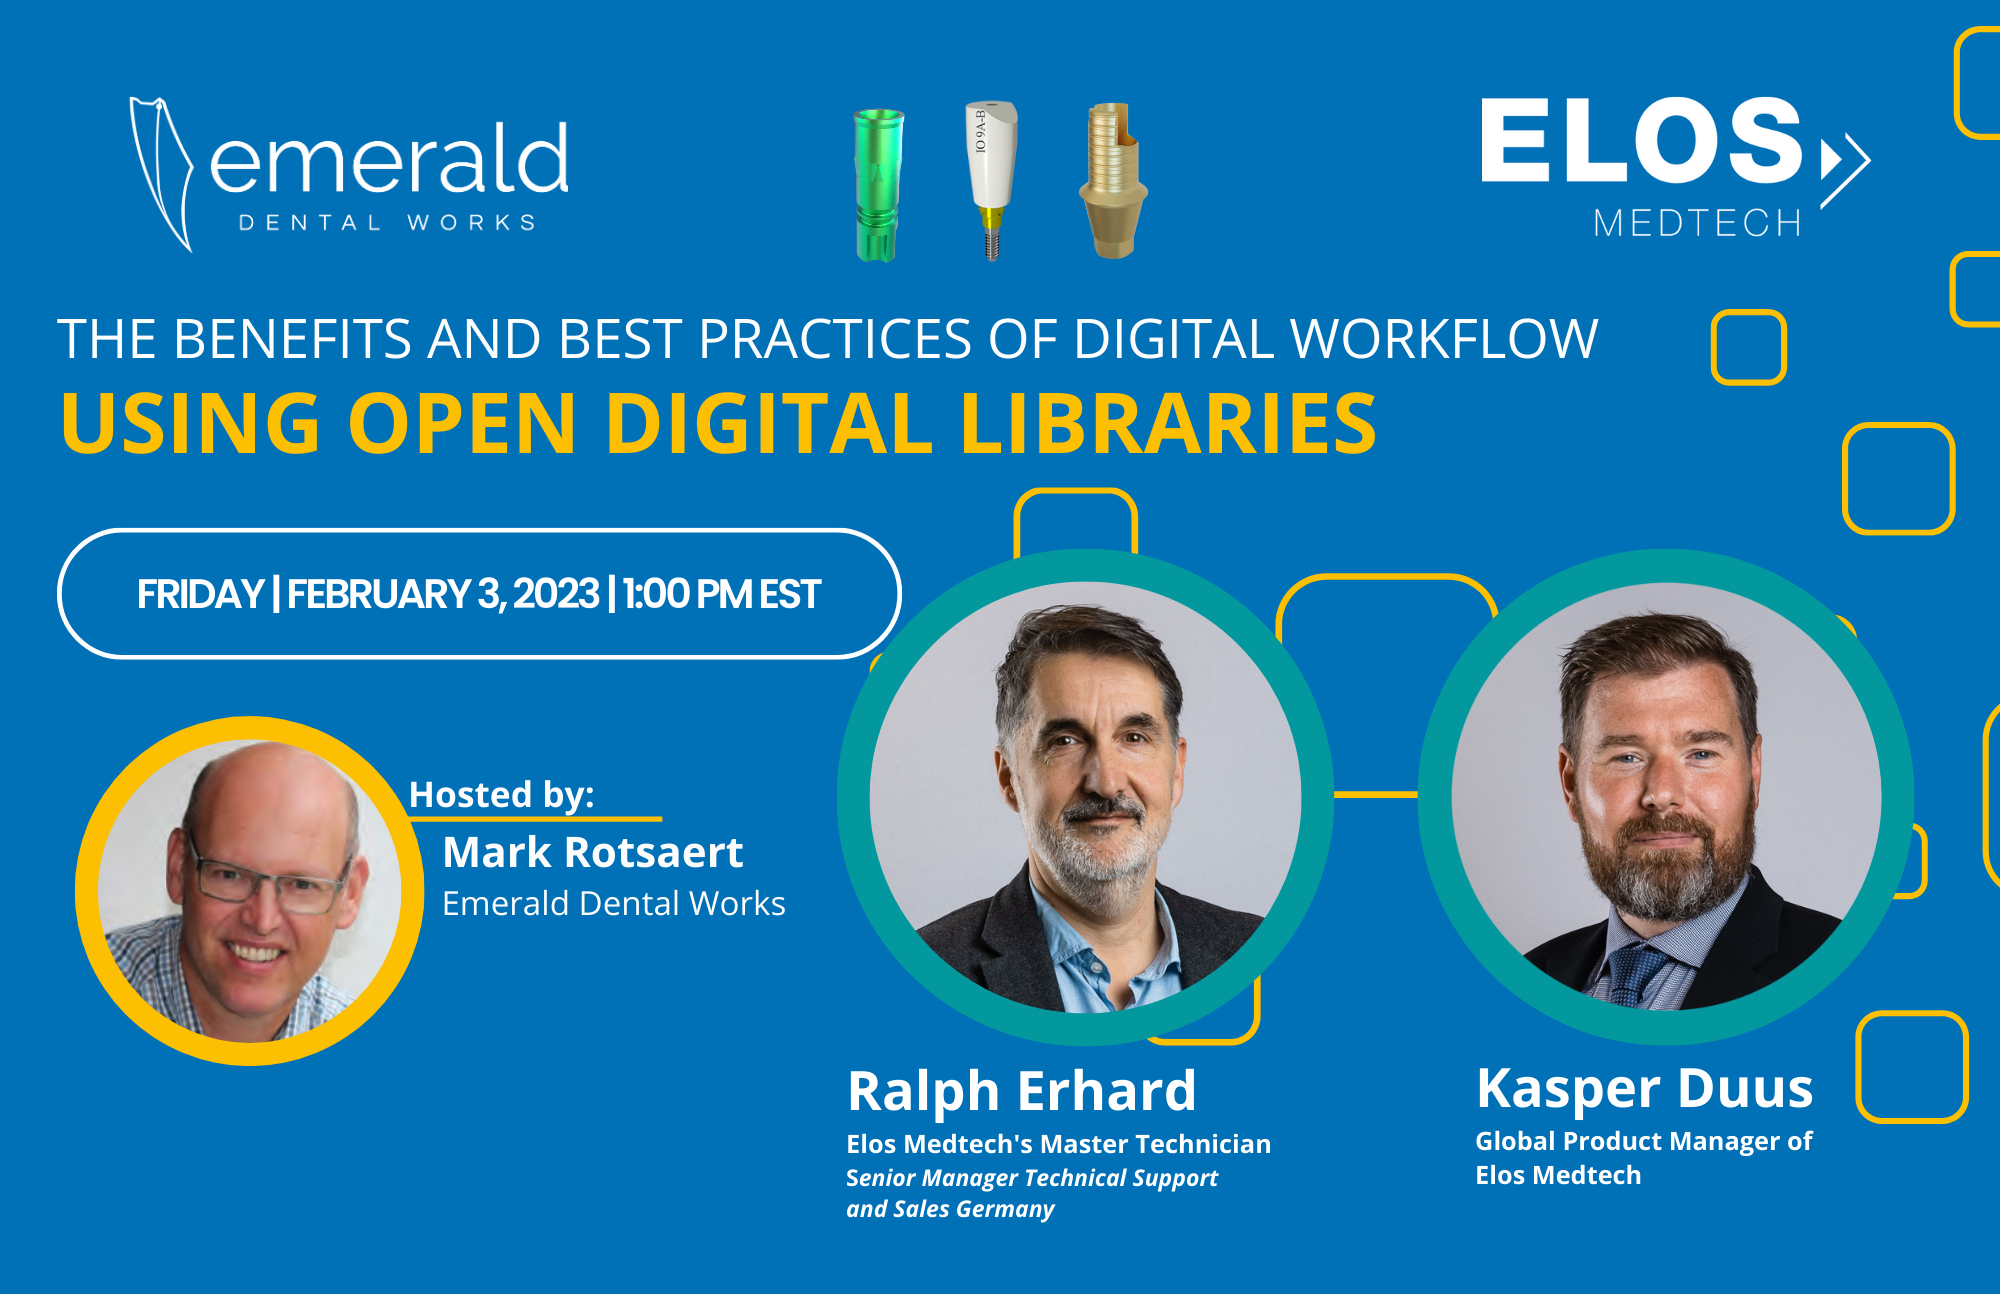 The Benefits and Best Practices of Digital Workflow Using Open Digital Libraries